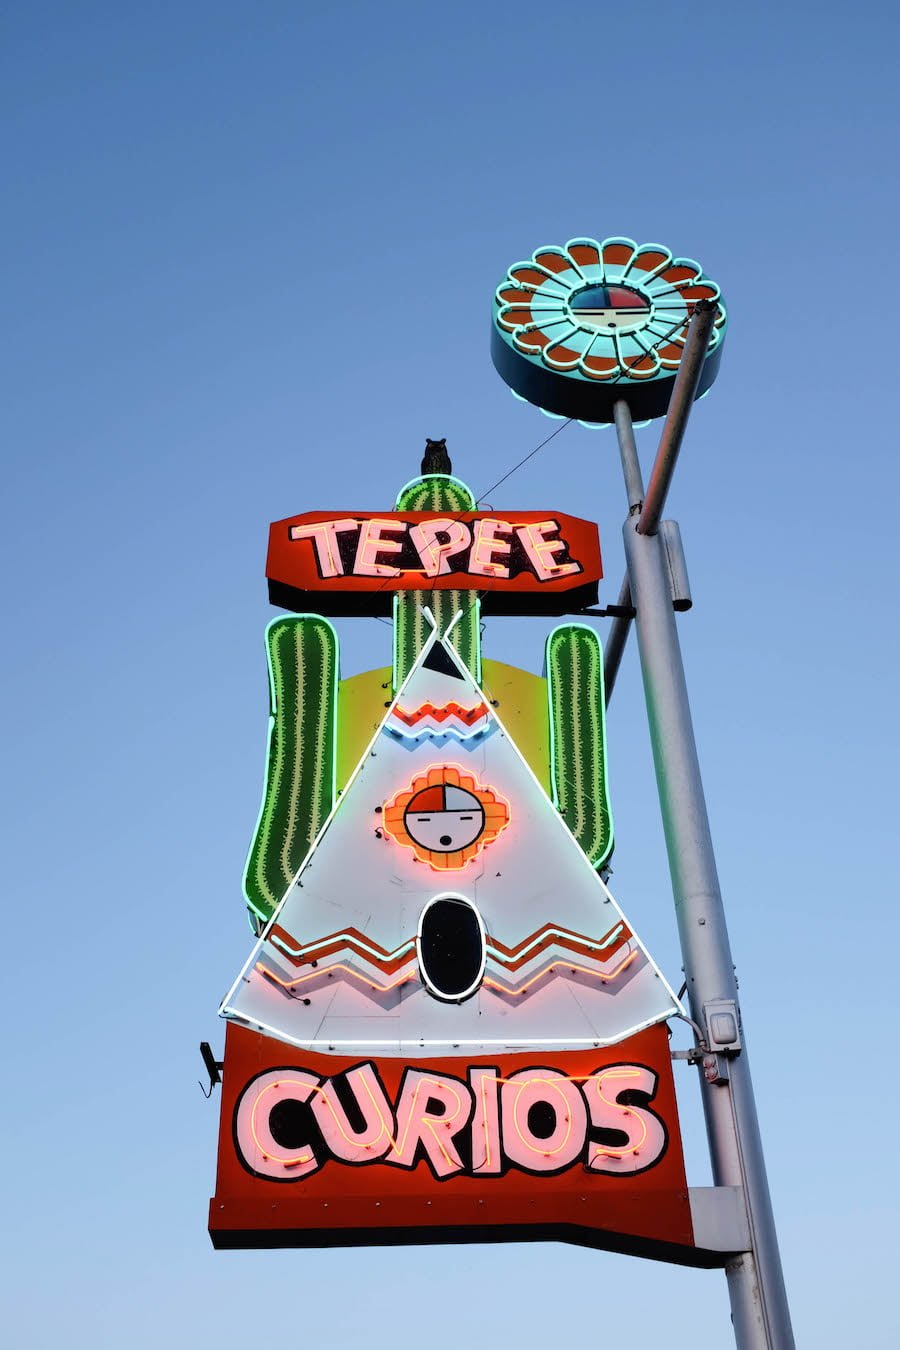 The Best Vintage Signs along Route 66 // Salty Canary